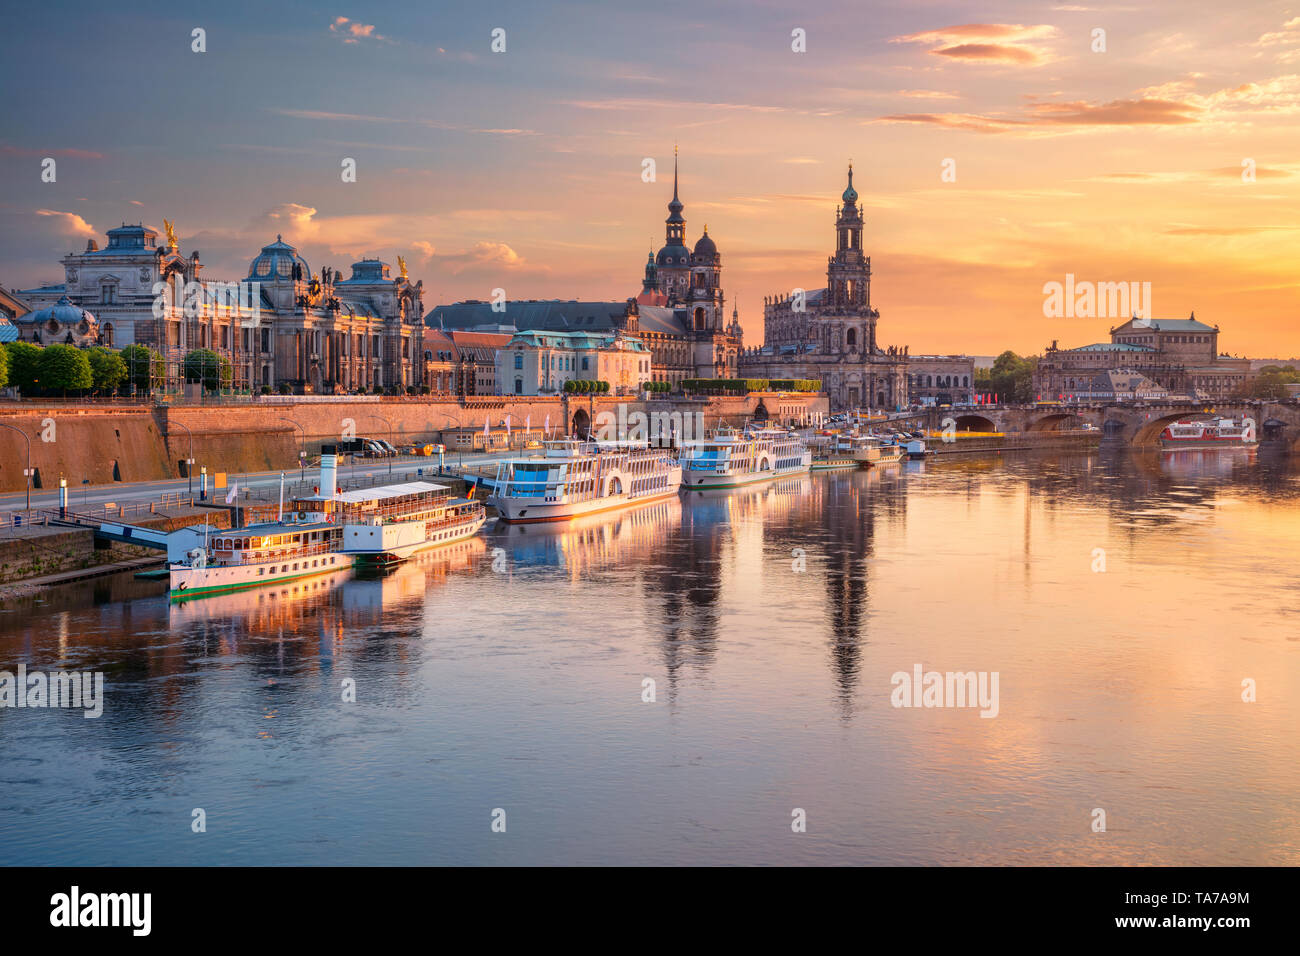 Dresden, Germany. Cityscape image of Dresden, Germany with reflection of the city in the Elbe river, during sunset. Stock Photo